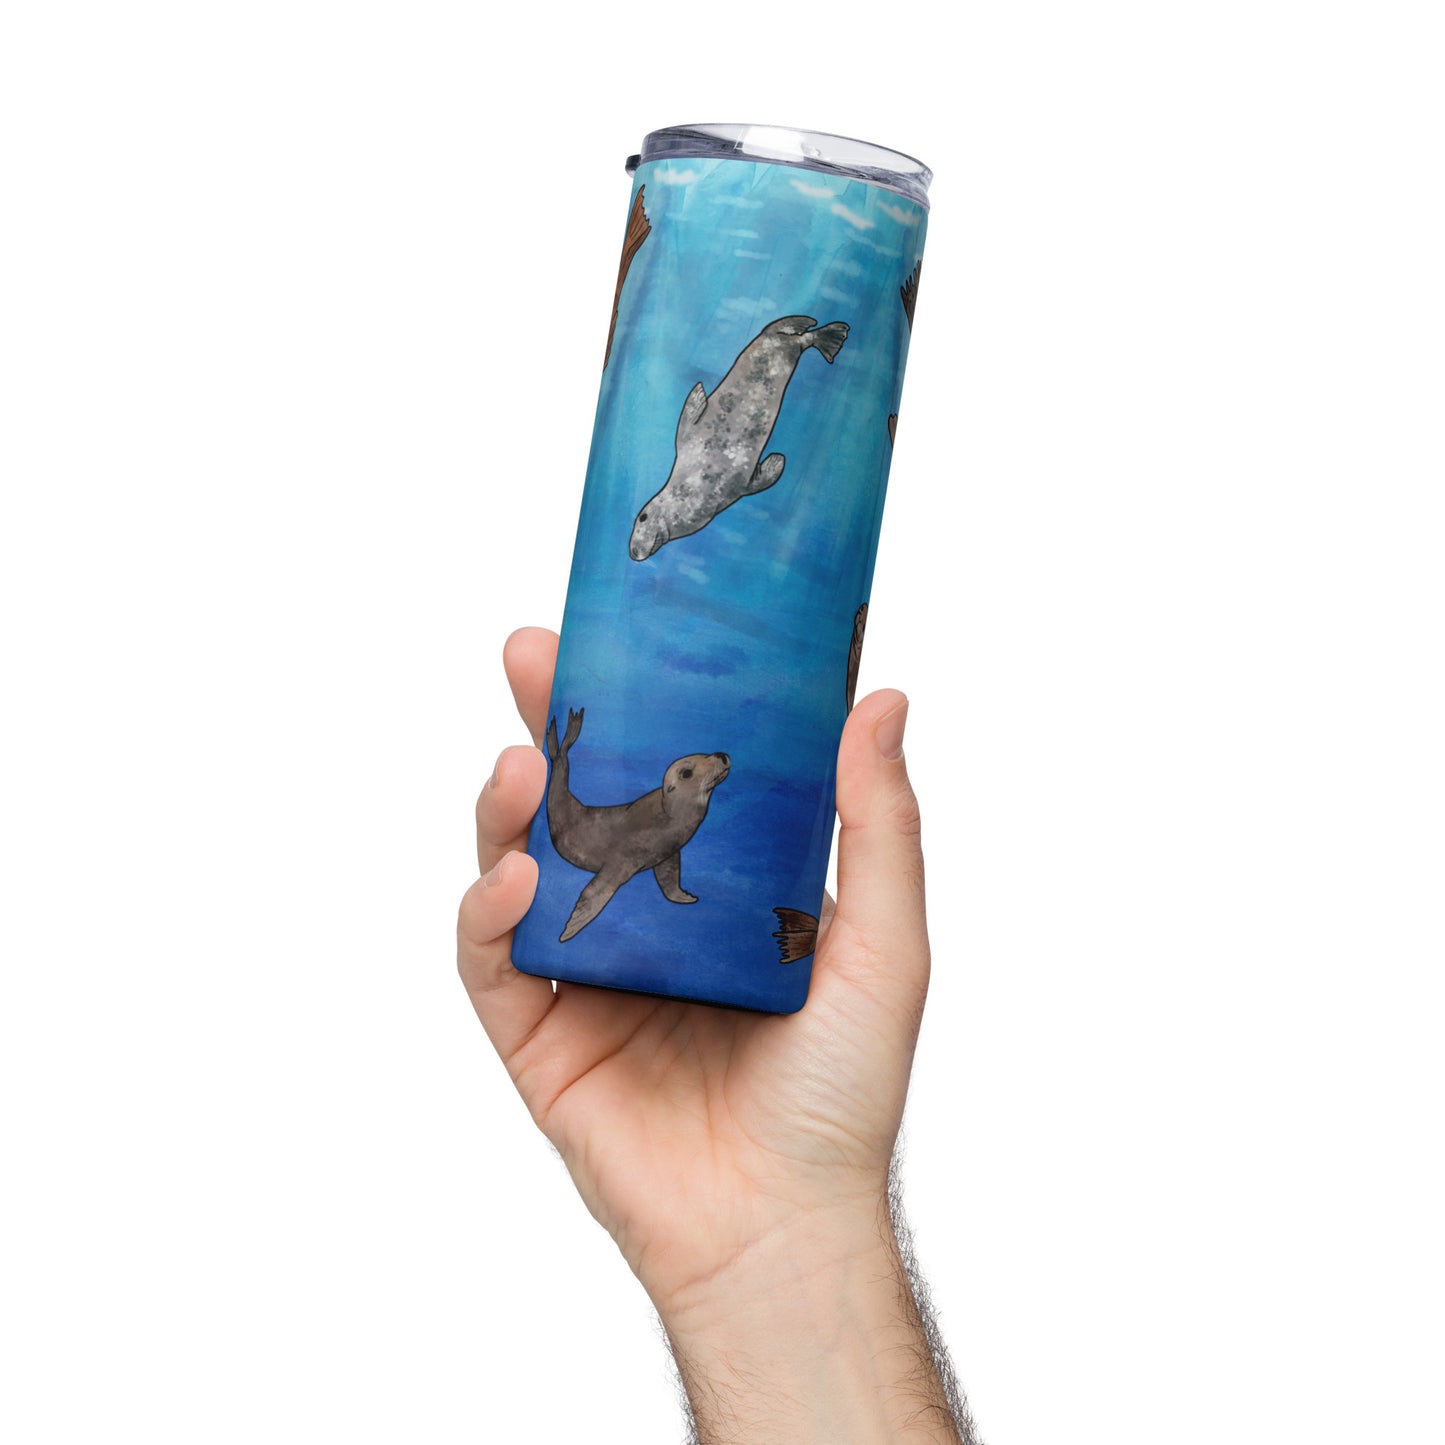 Pinniped Stainless steel tumbler